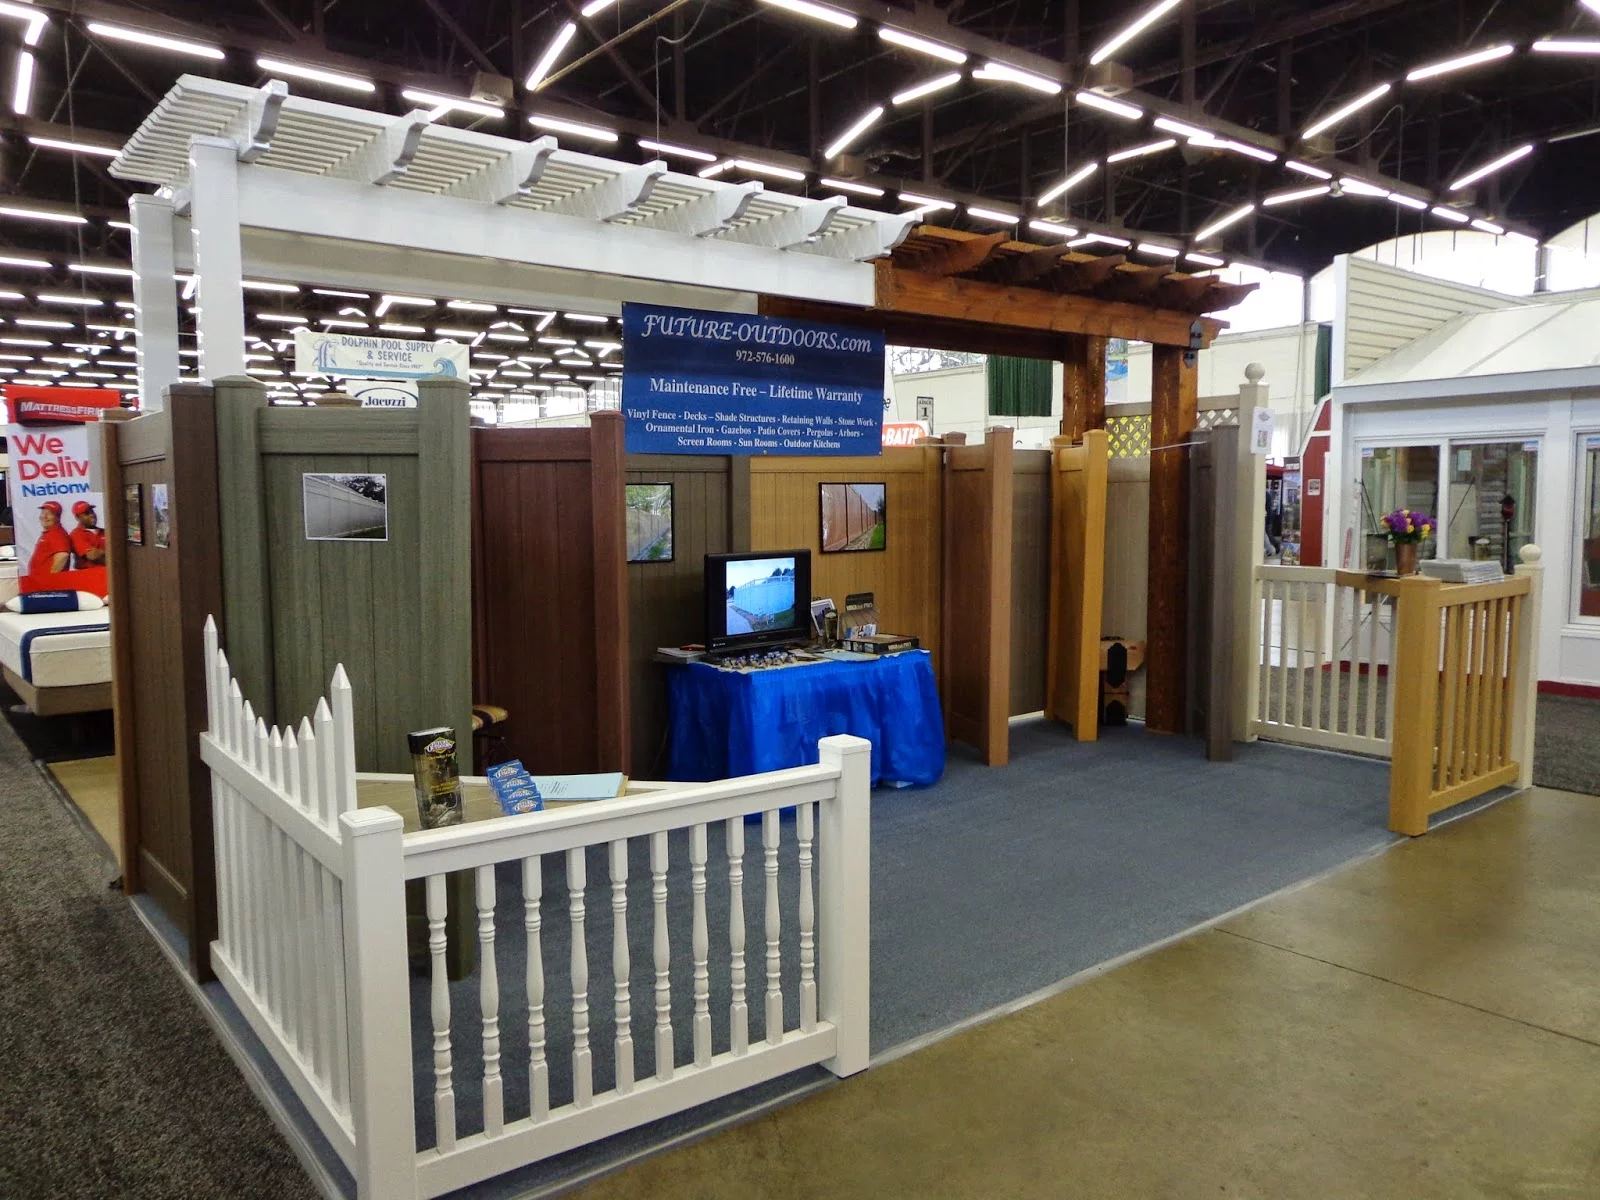 Visit Future Outdoors at the 36th Spring Texas Home & Garden Show